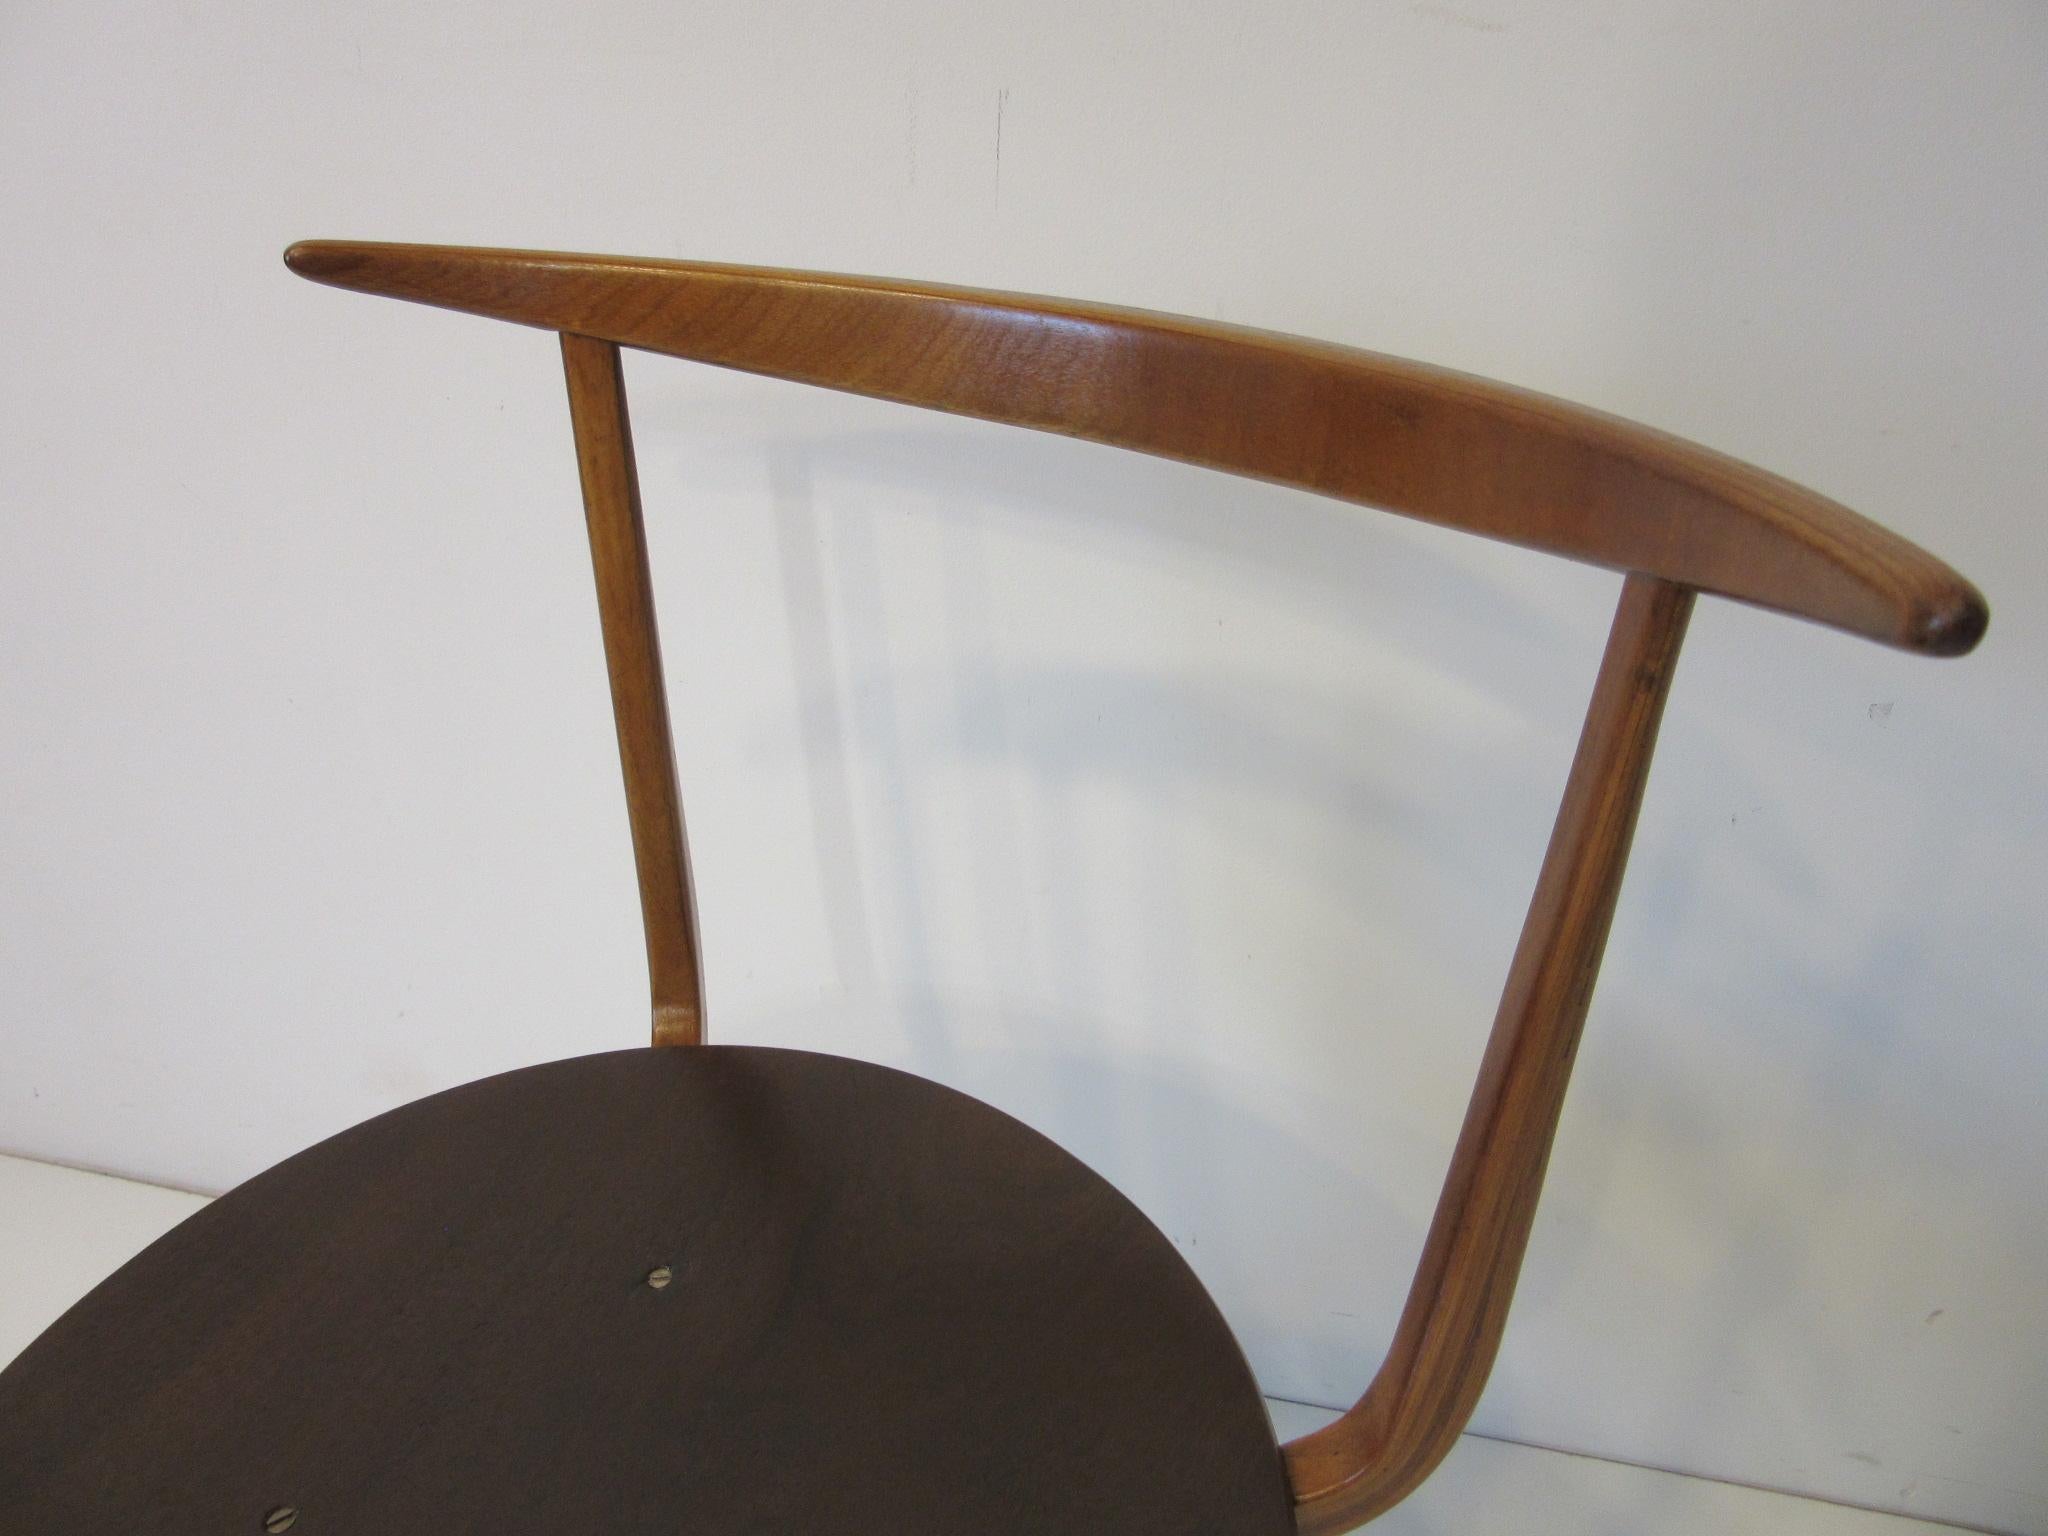 Plywood Early George Nelson Pretzel Side Chair for Herman Miller